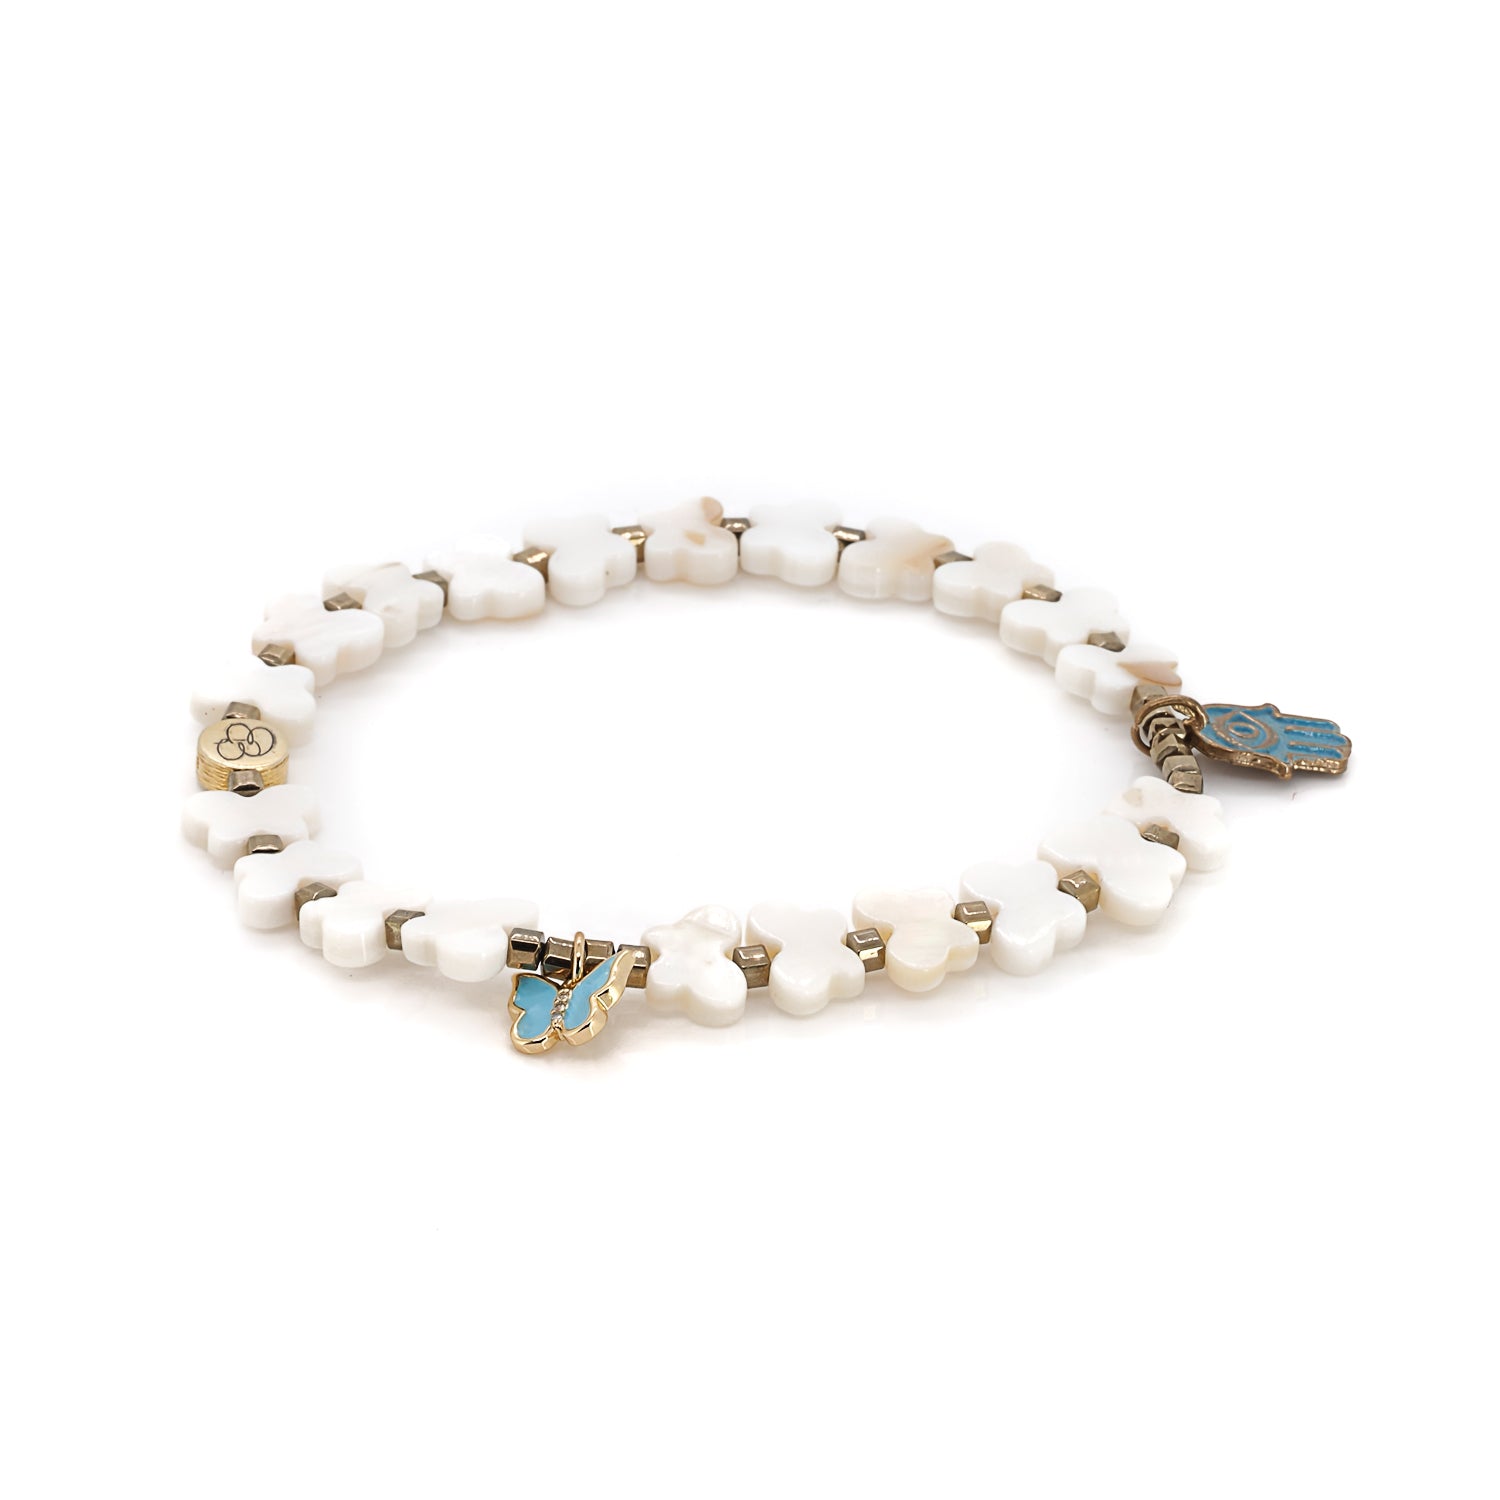 Protective and Elegant - The Hamsa Hand and pearls combined.